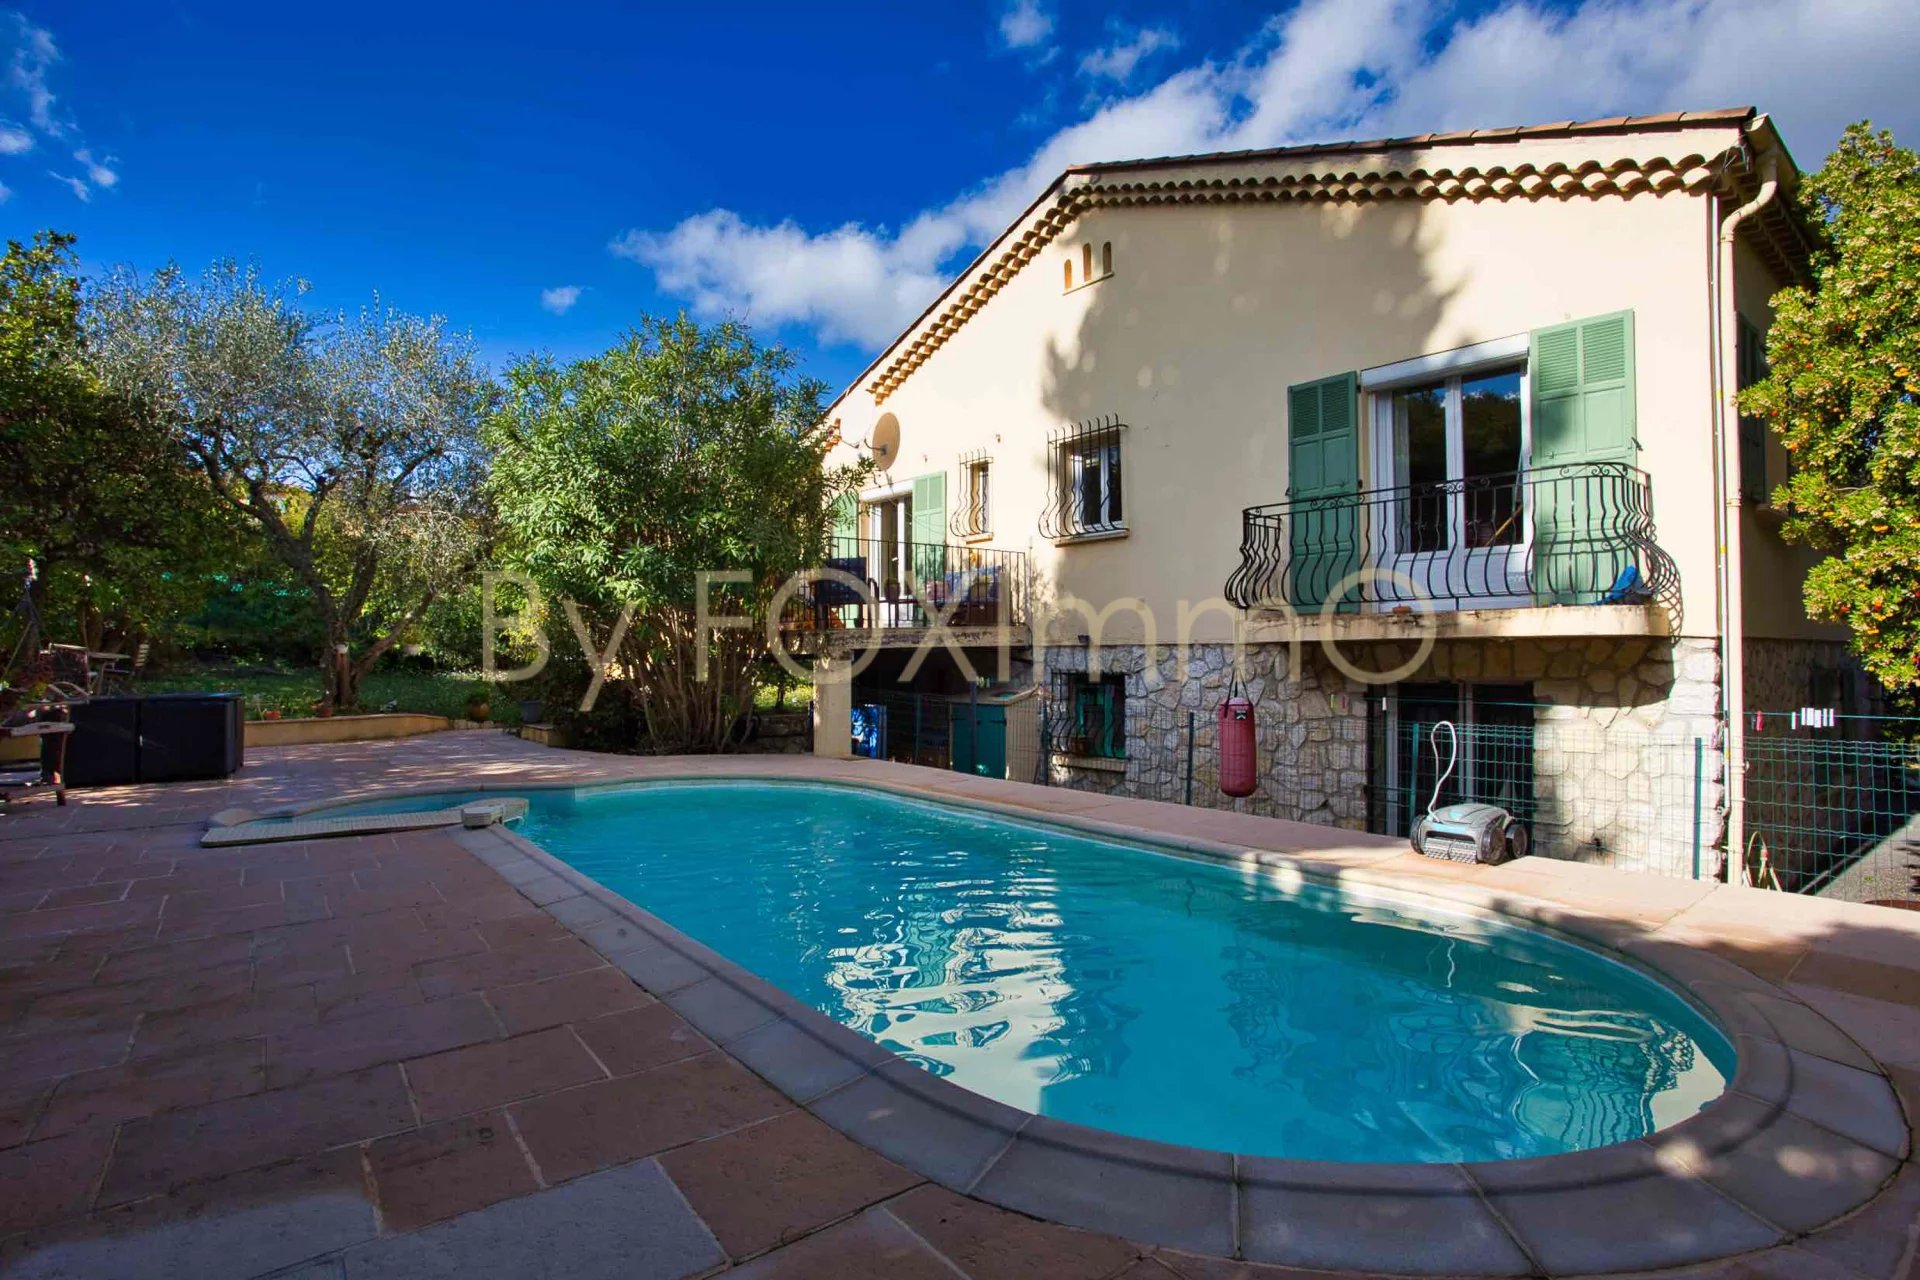 SOLD 6P family villa at walking distance from the village with pool